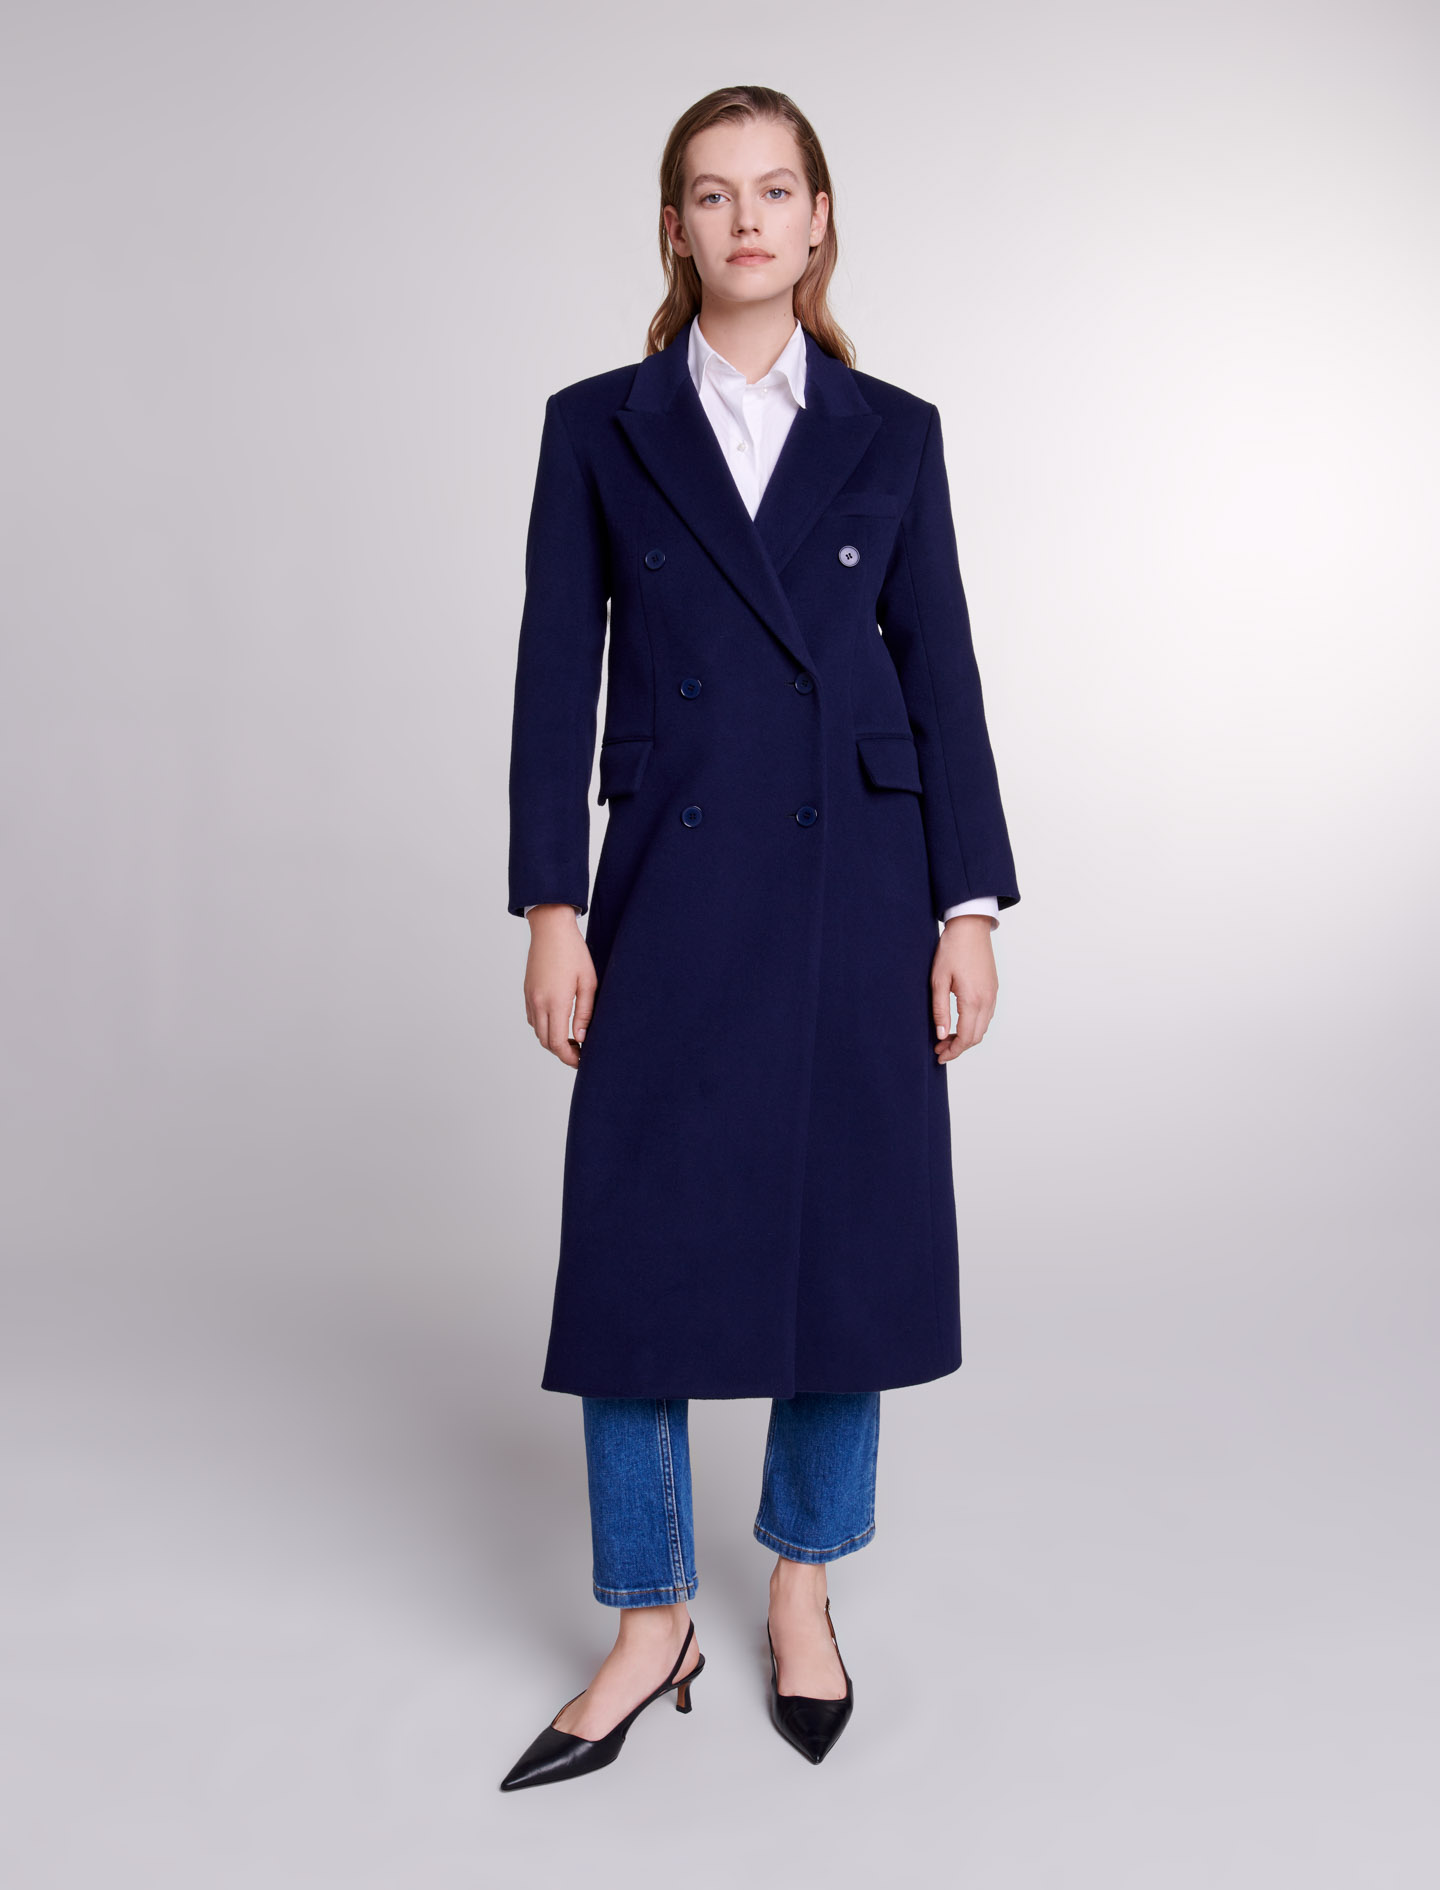 Maje Woman's virgin wool, Long coat for Spring/Summer, in color Navy / Blue